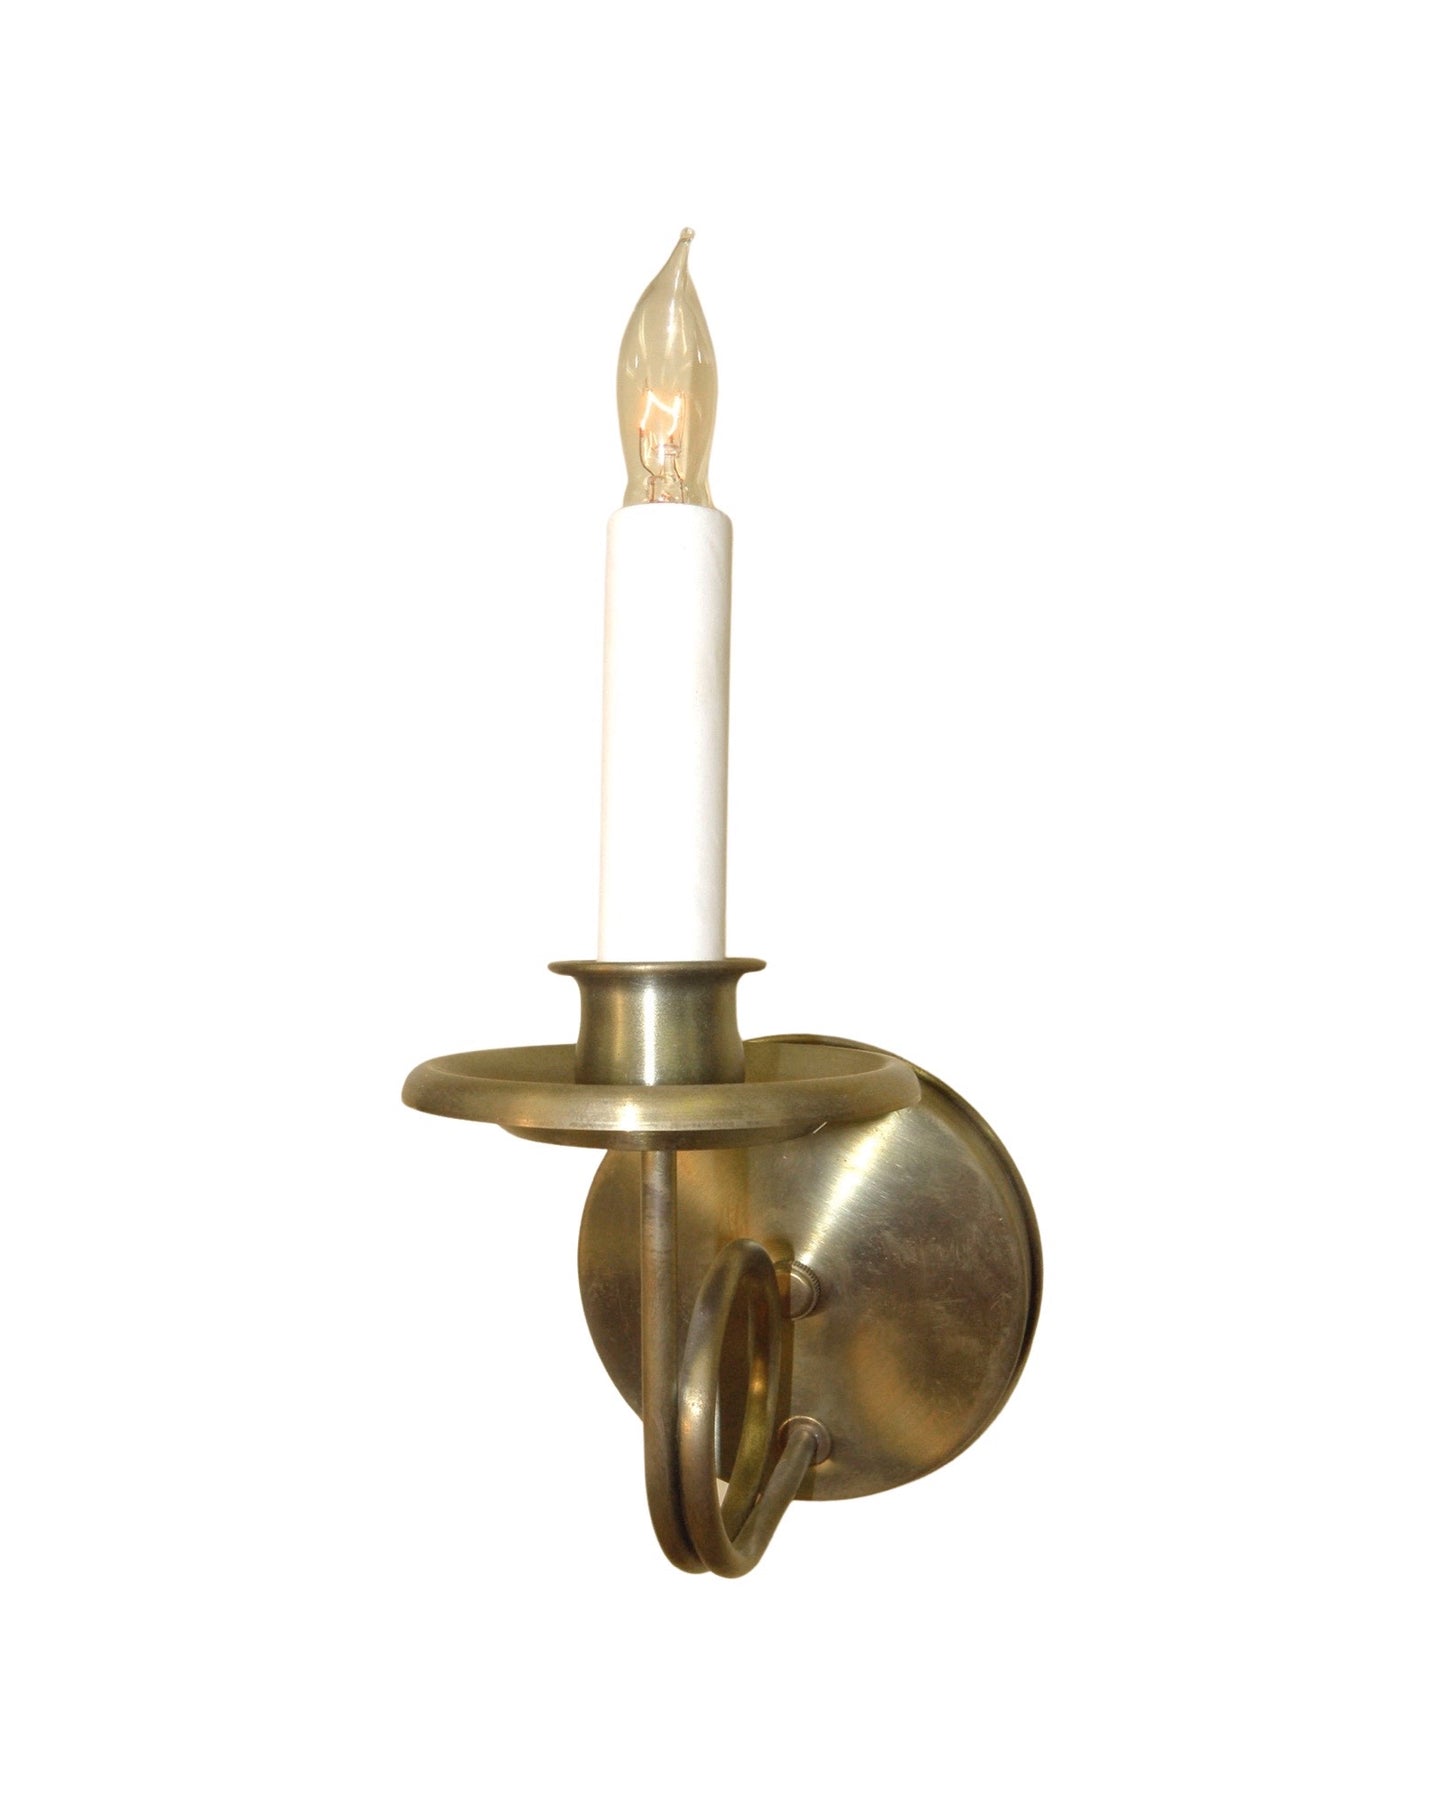 New Canaan Sconce